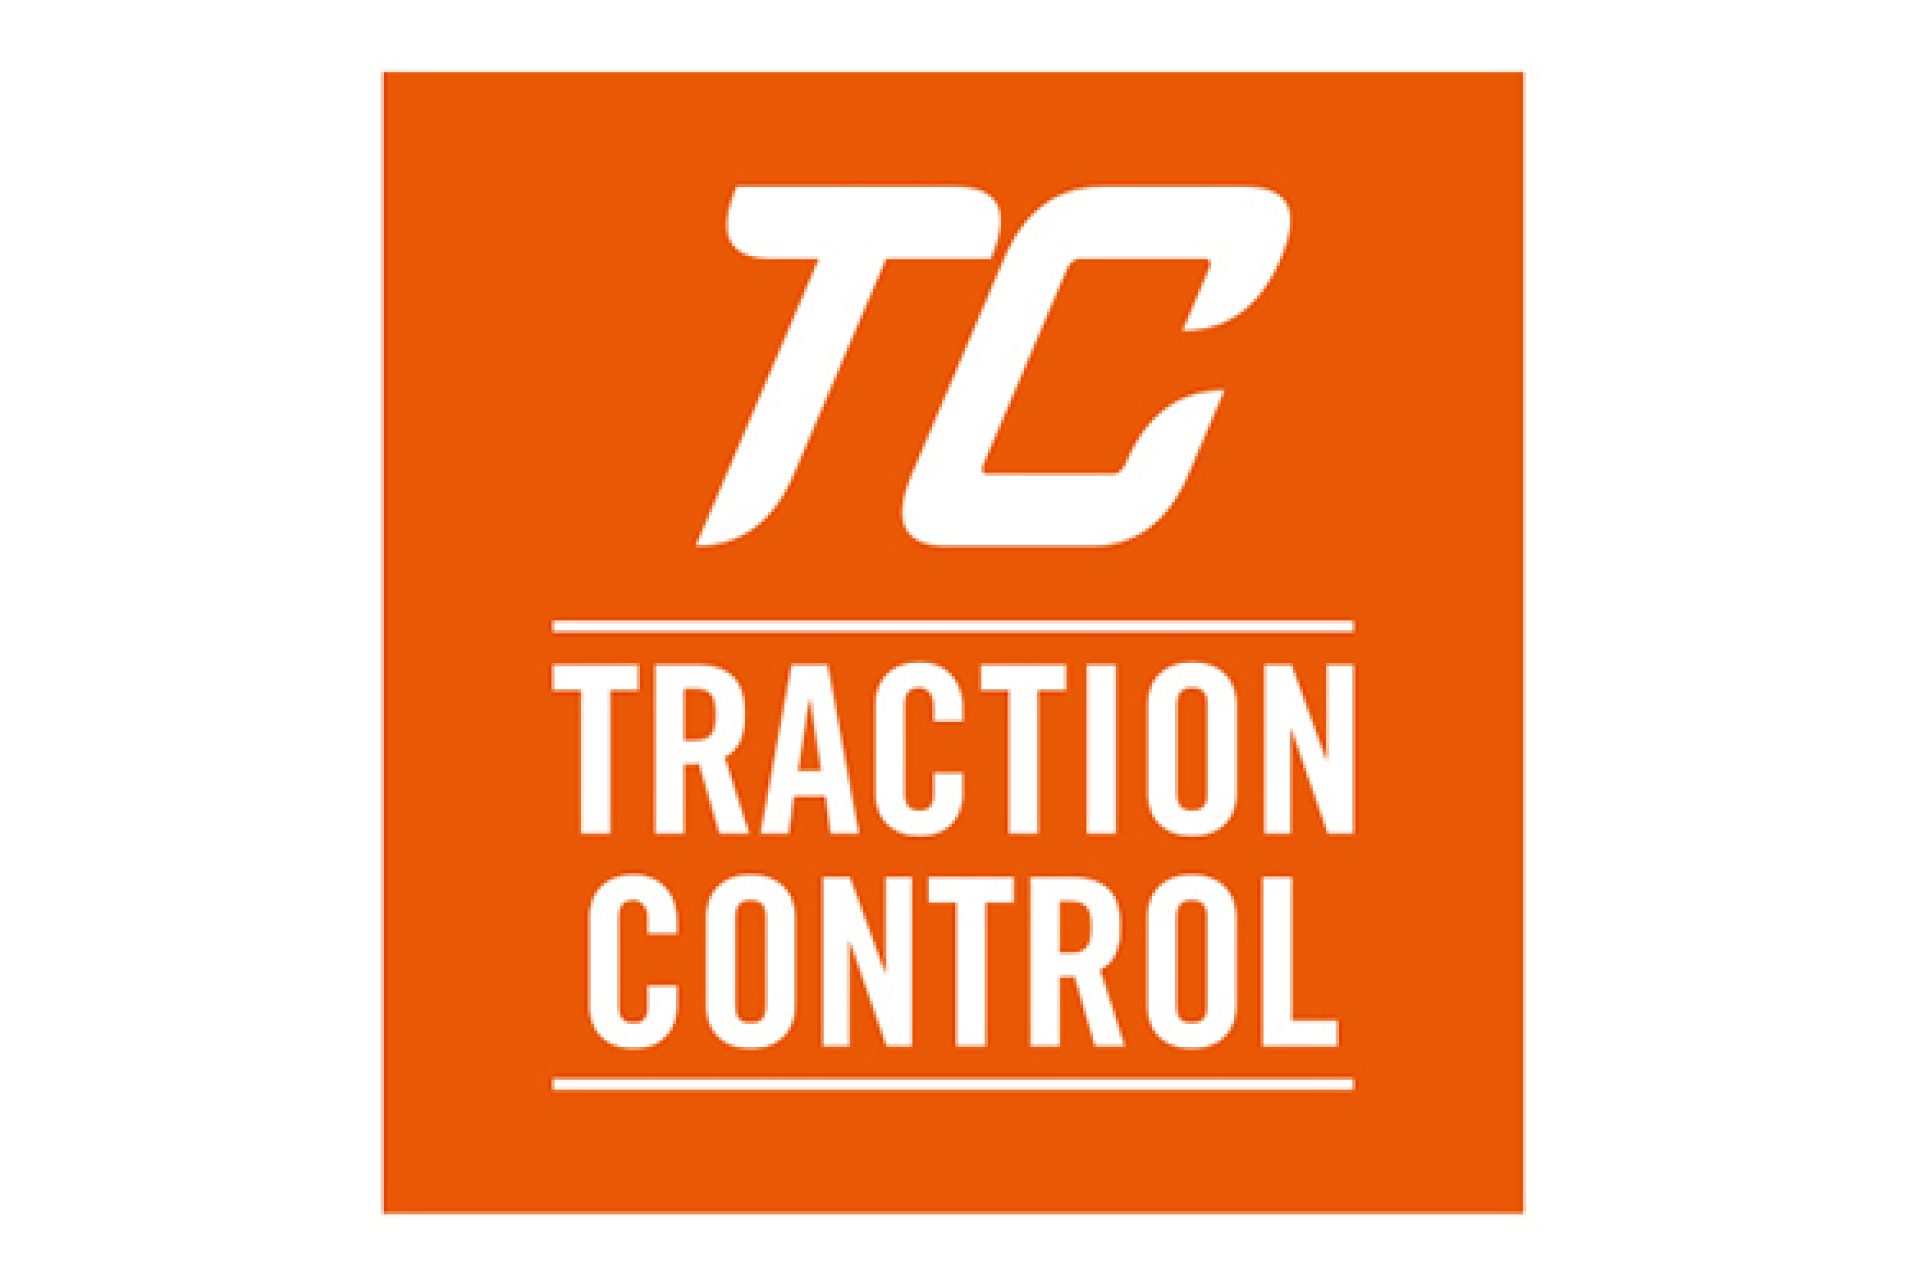 TRACTION CONTROL